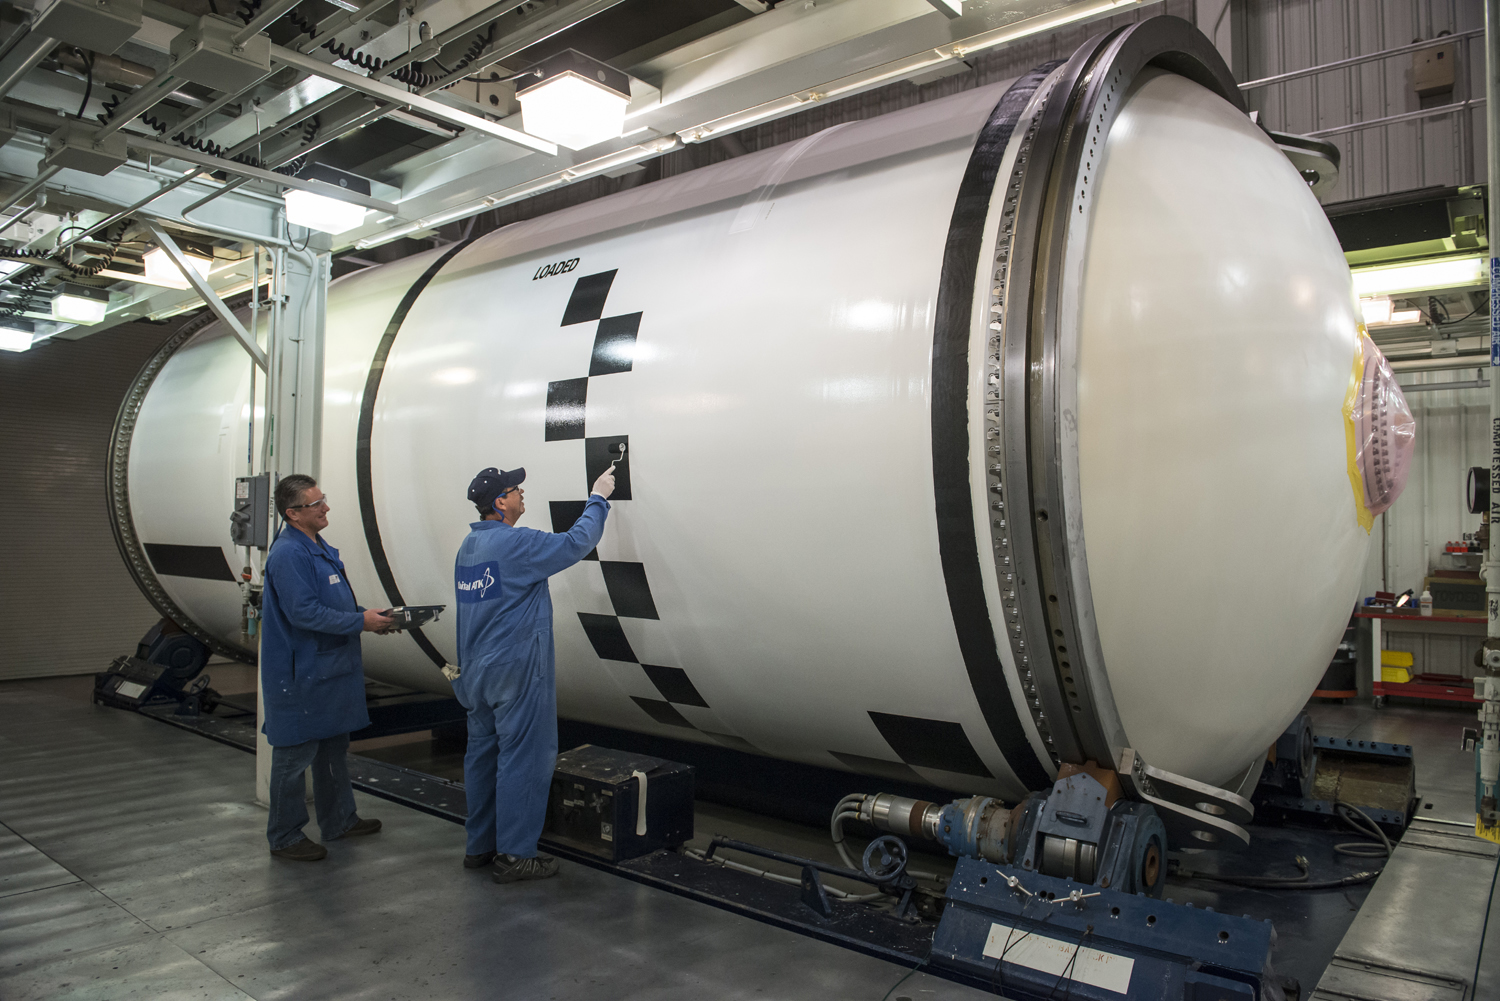 Technicians apply photogrammetric markings on completed segments for the solid rocket booster motors.